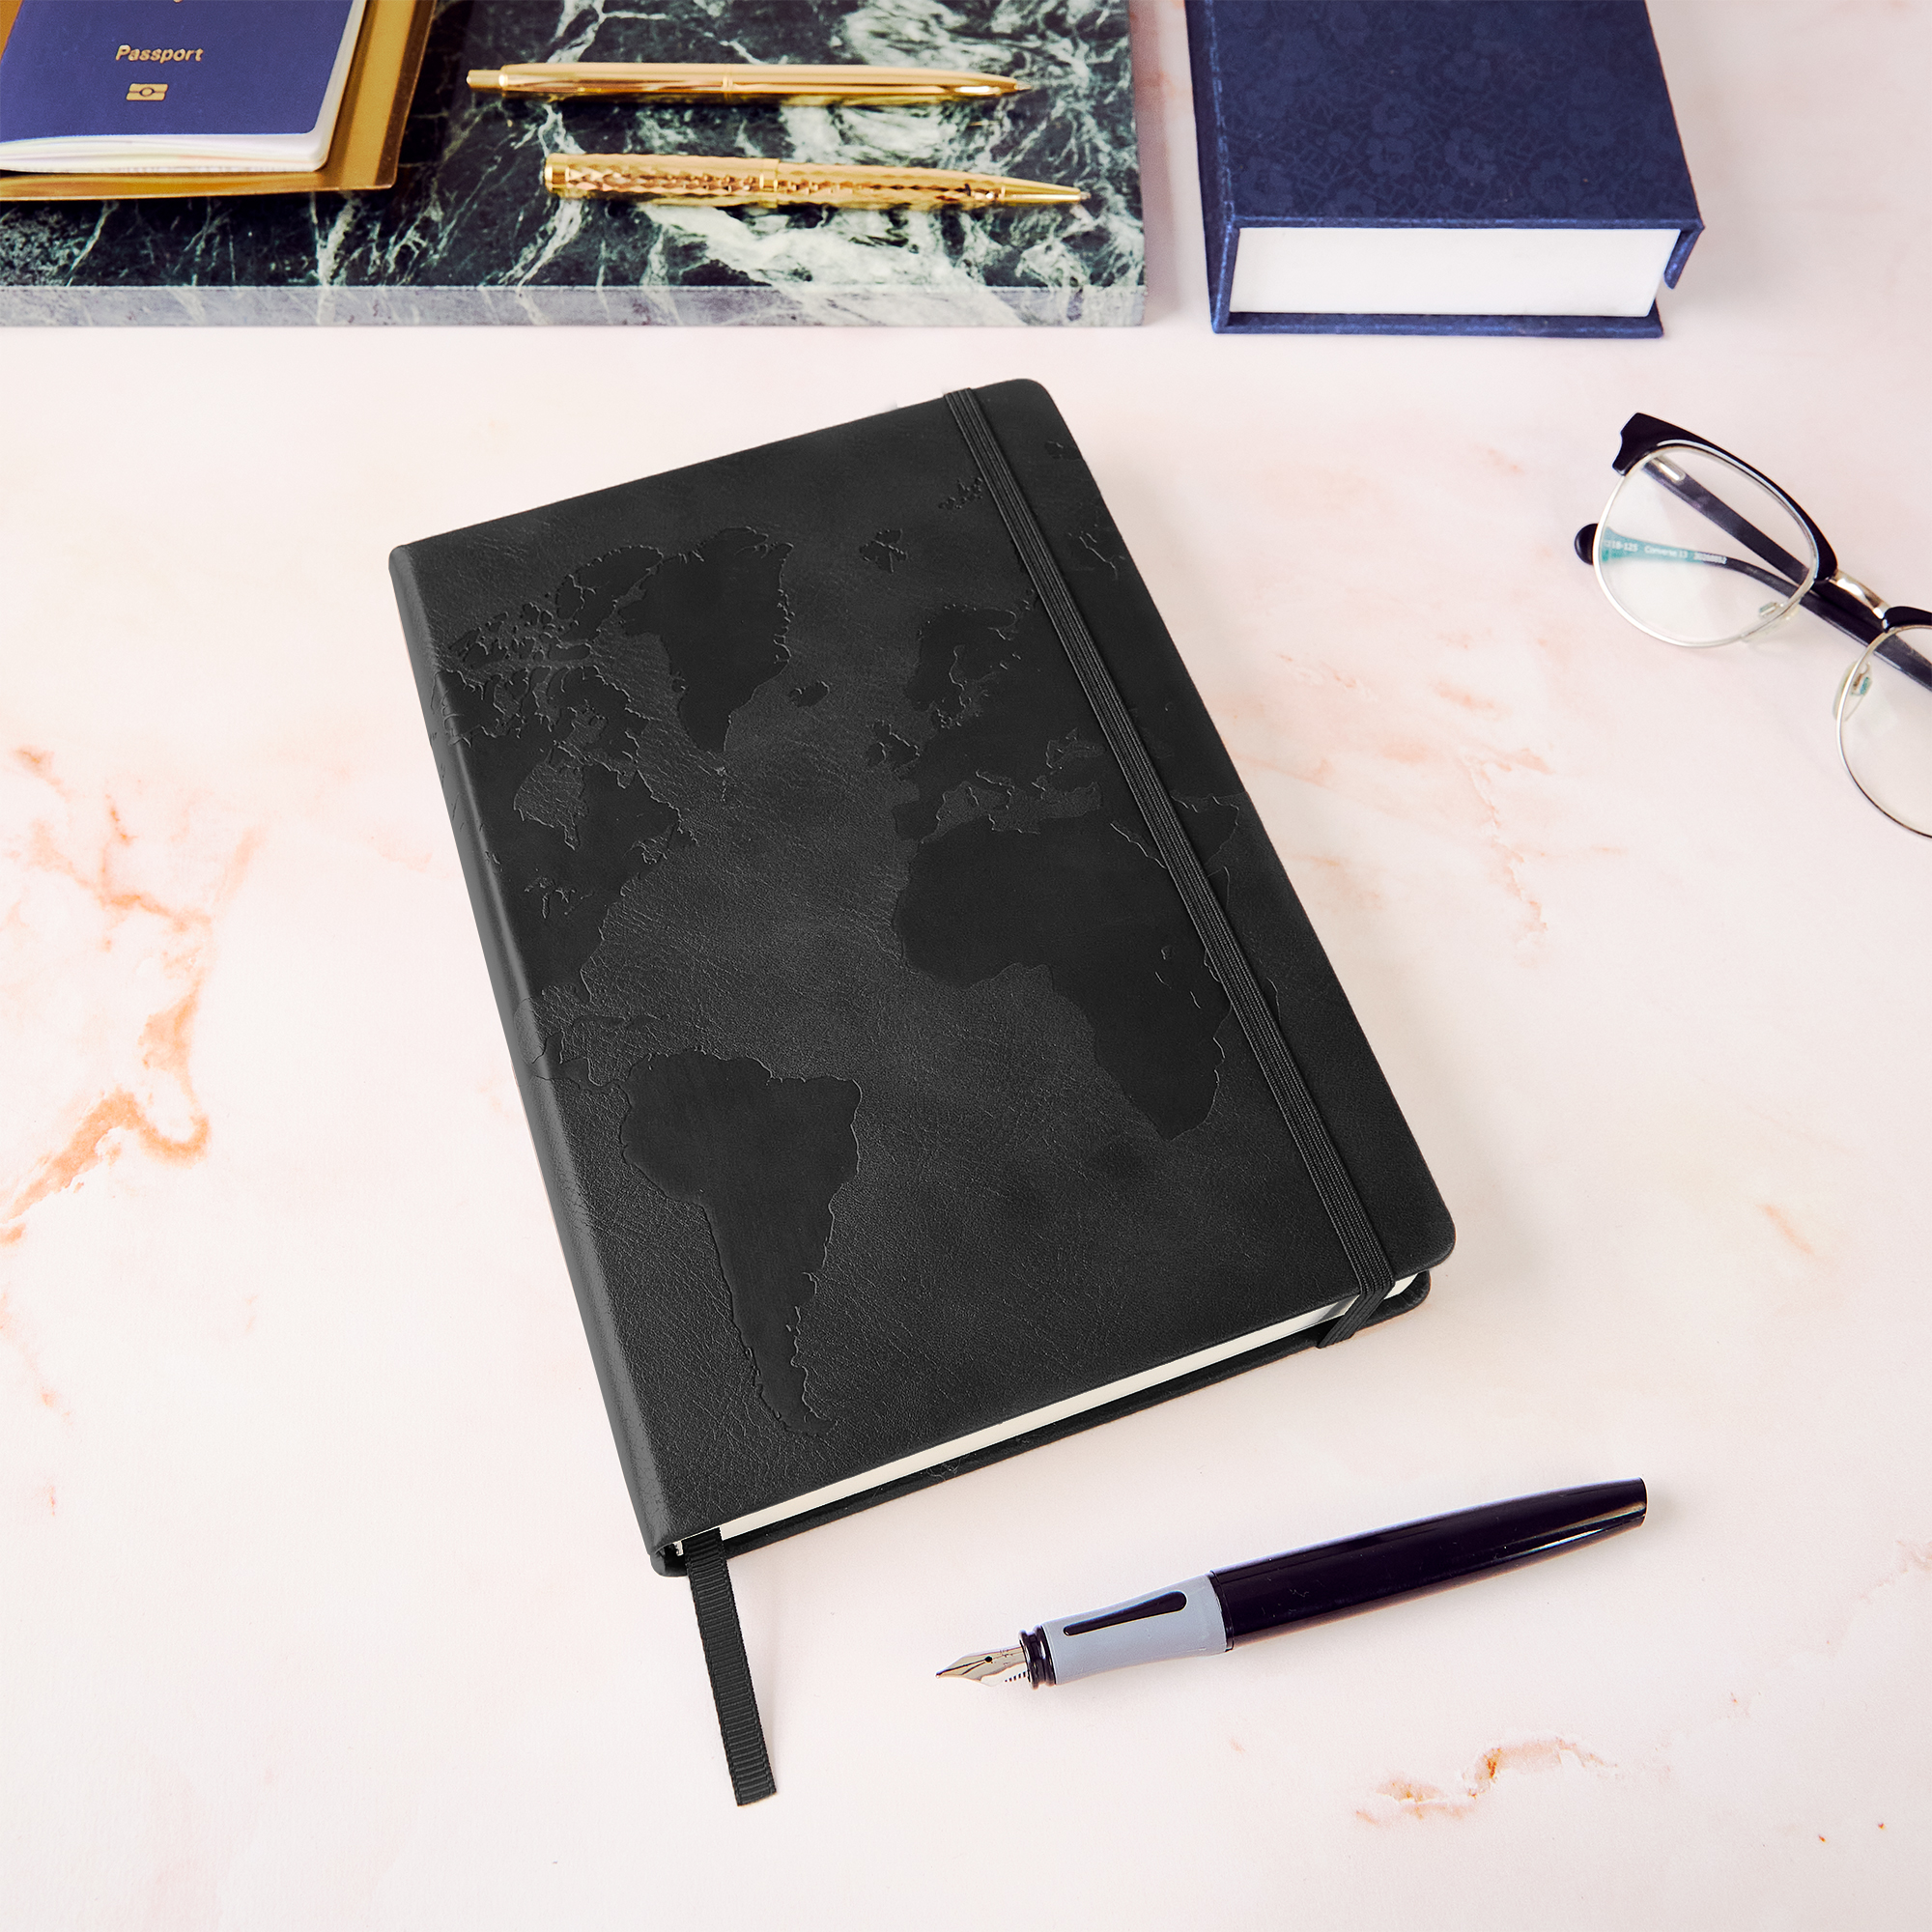 Contemporary Charcoal Black A5 travel journal, merging style with function for globetrotters.